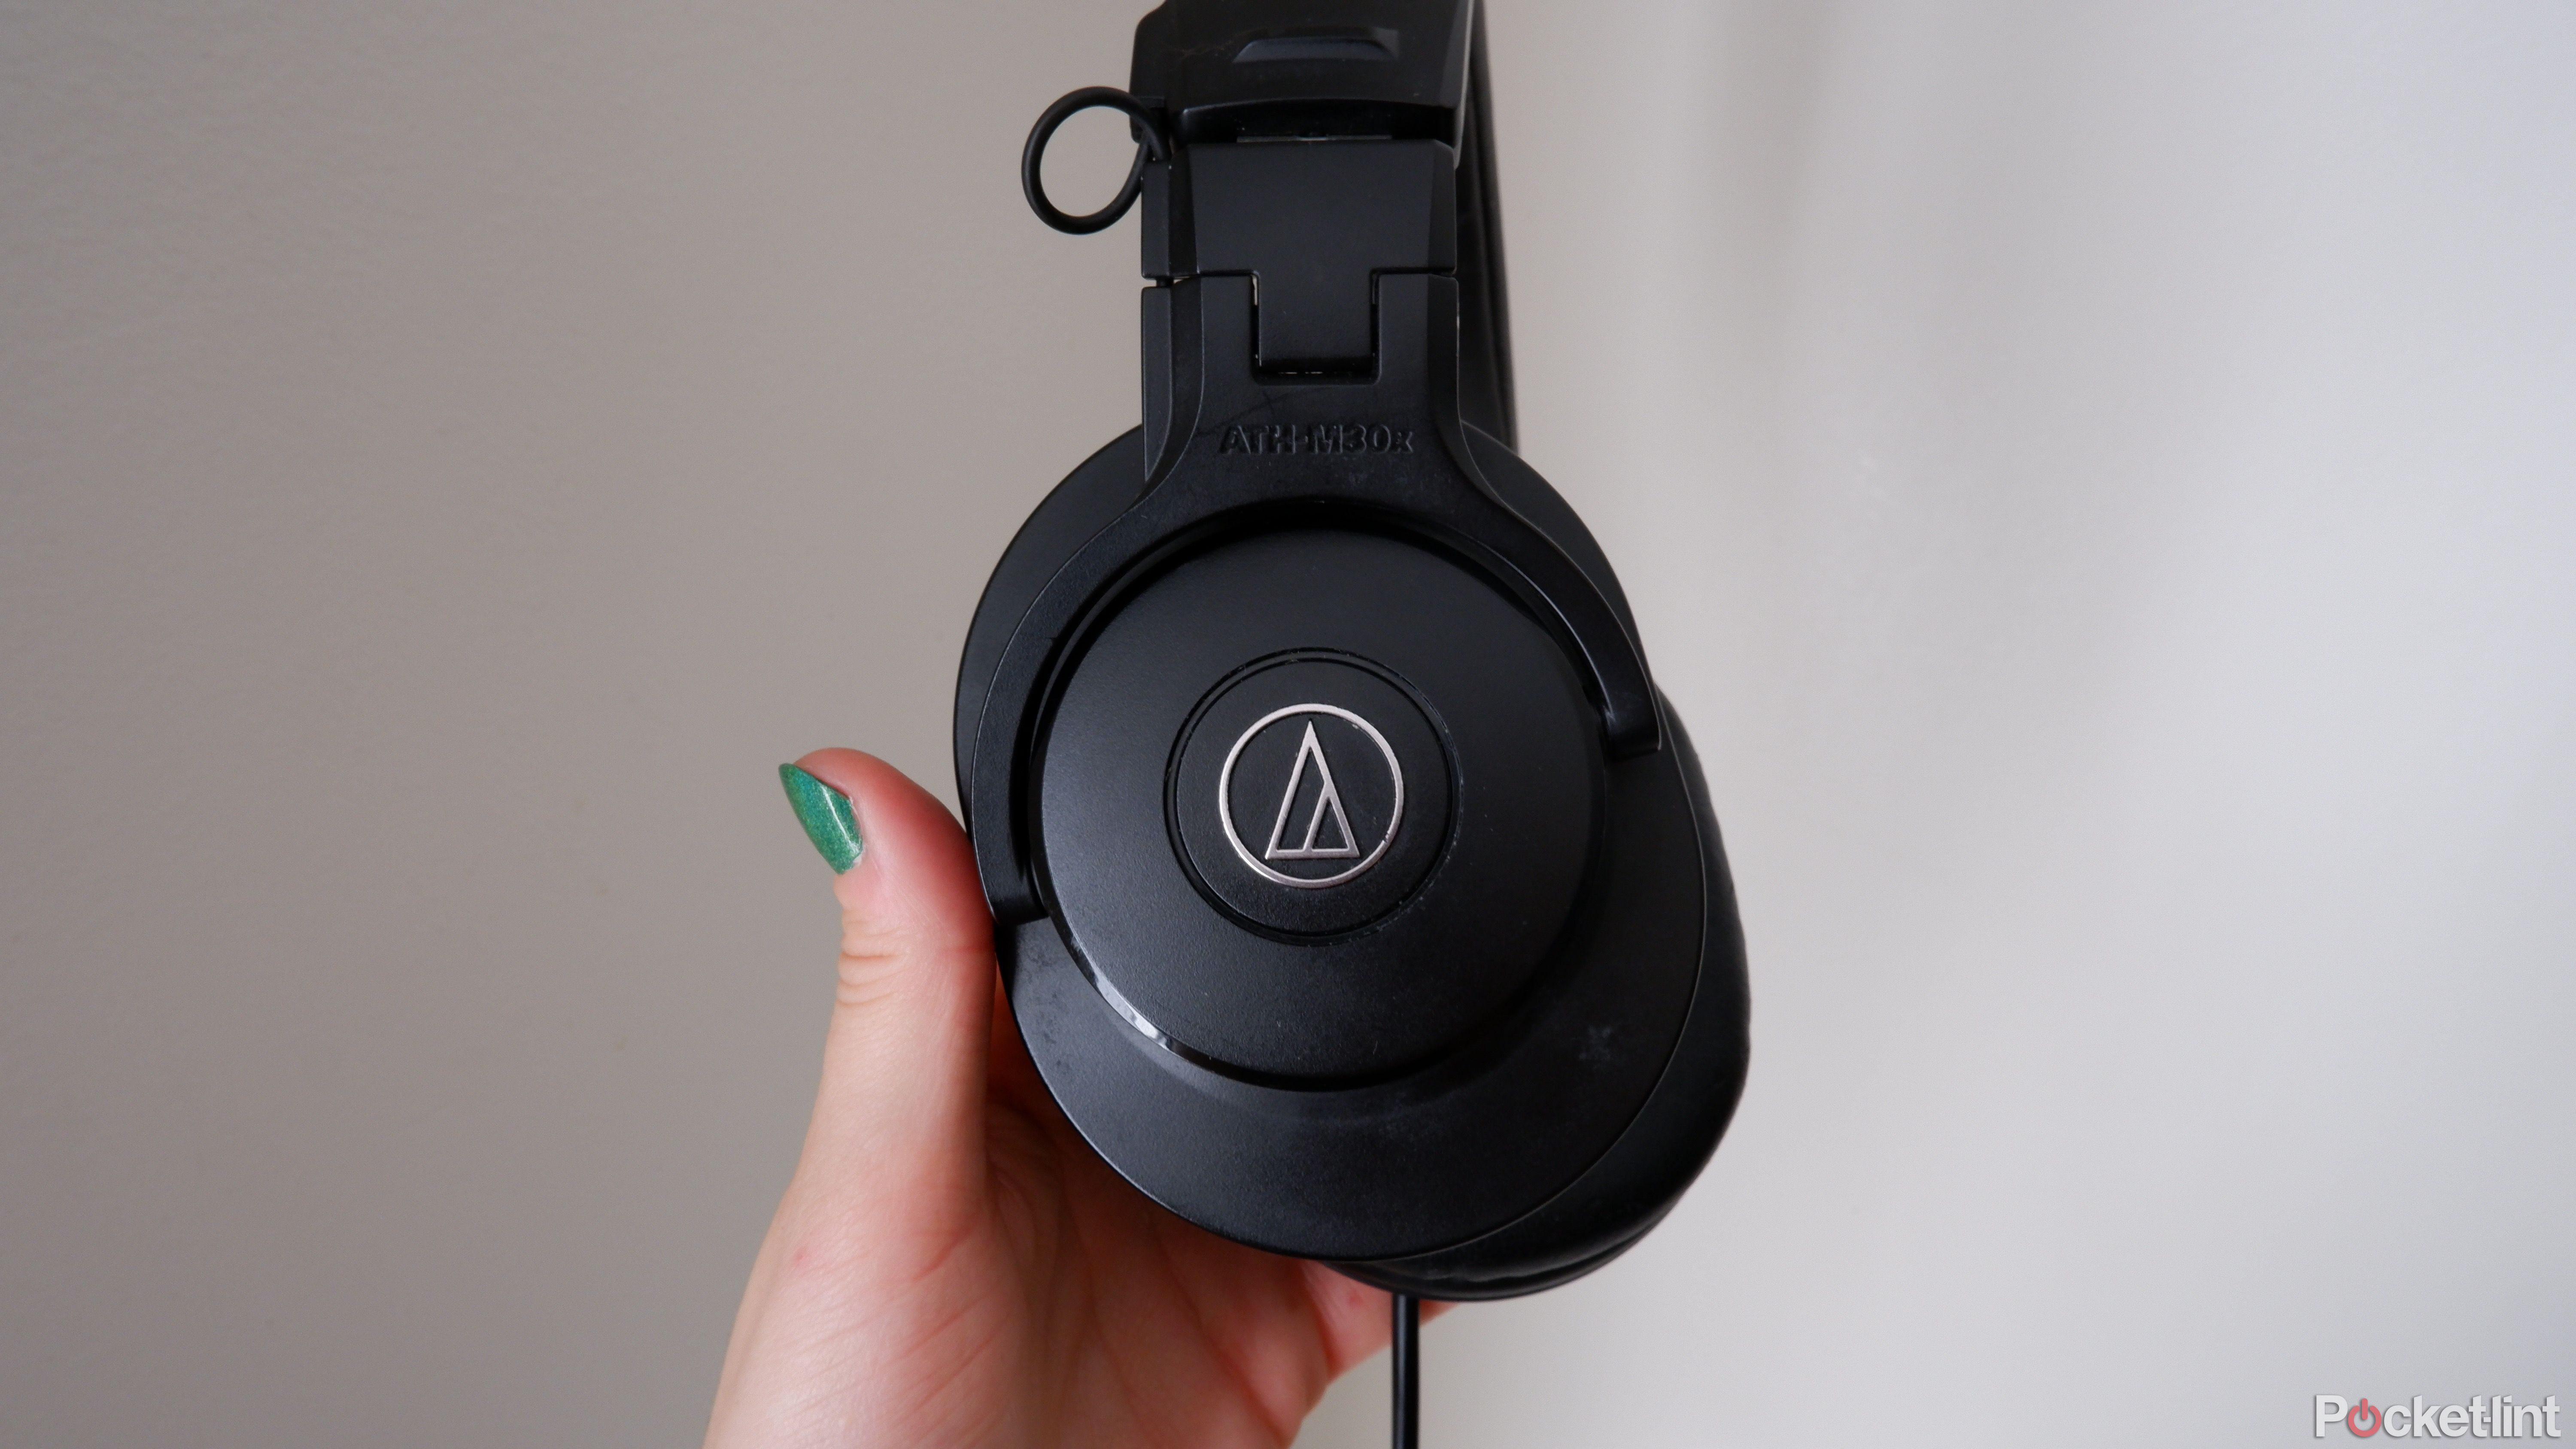 The Audio-Technica ATH-M30x being held by a hand with the logo showing